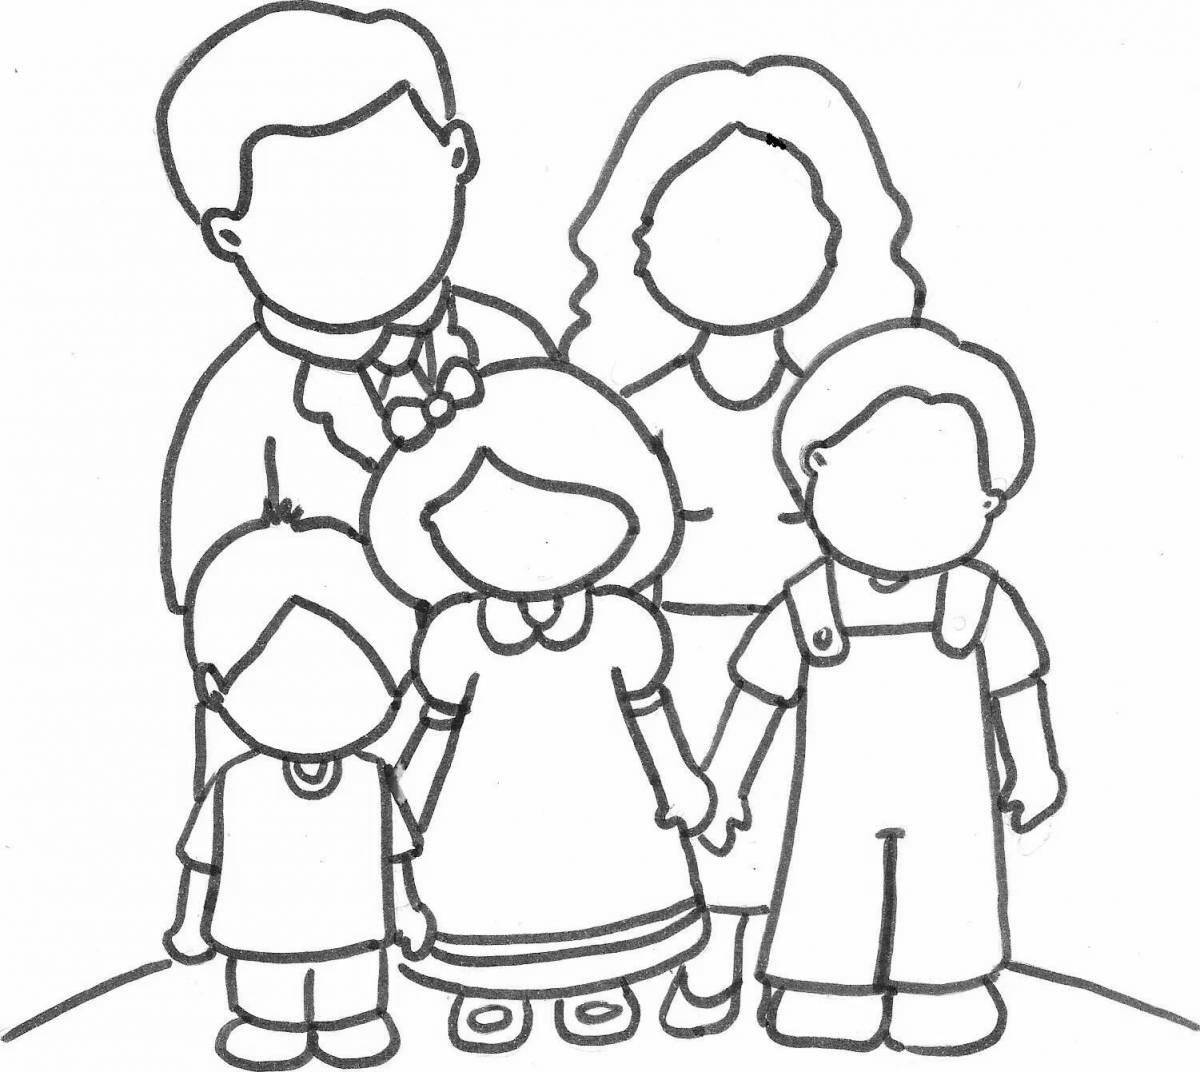 Fun family coloring book for 3-4 year olds